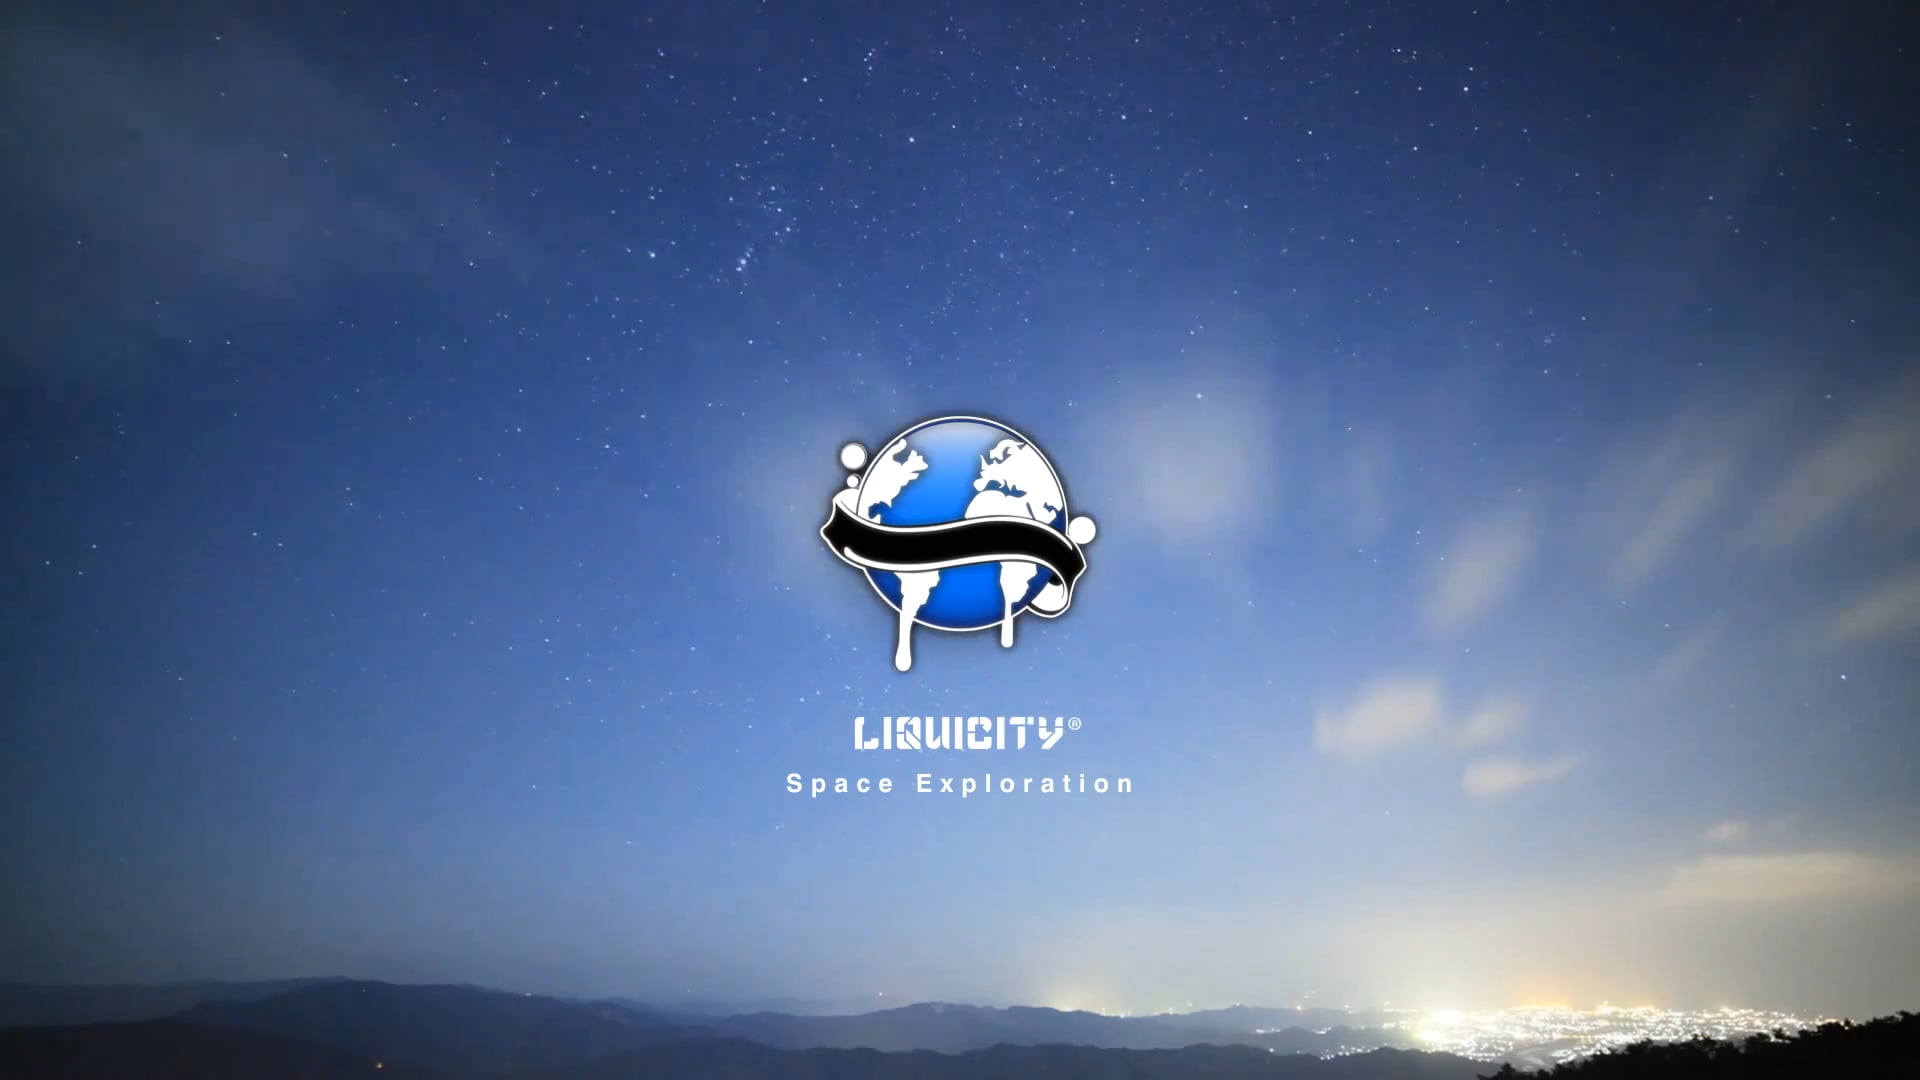 Liquicity Space Exploration Logo, Liquicity Hd Wallpaper - Helicopter , HD Wallpaper & Backgrounds